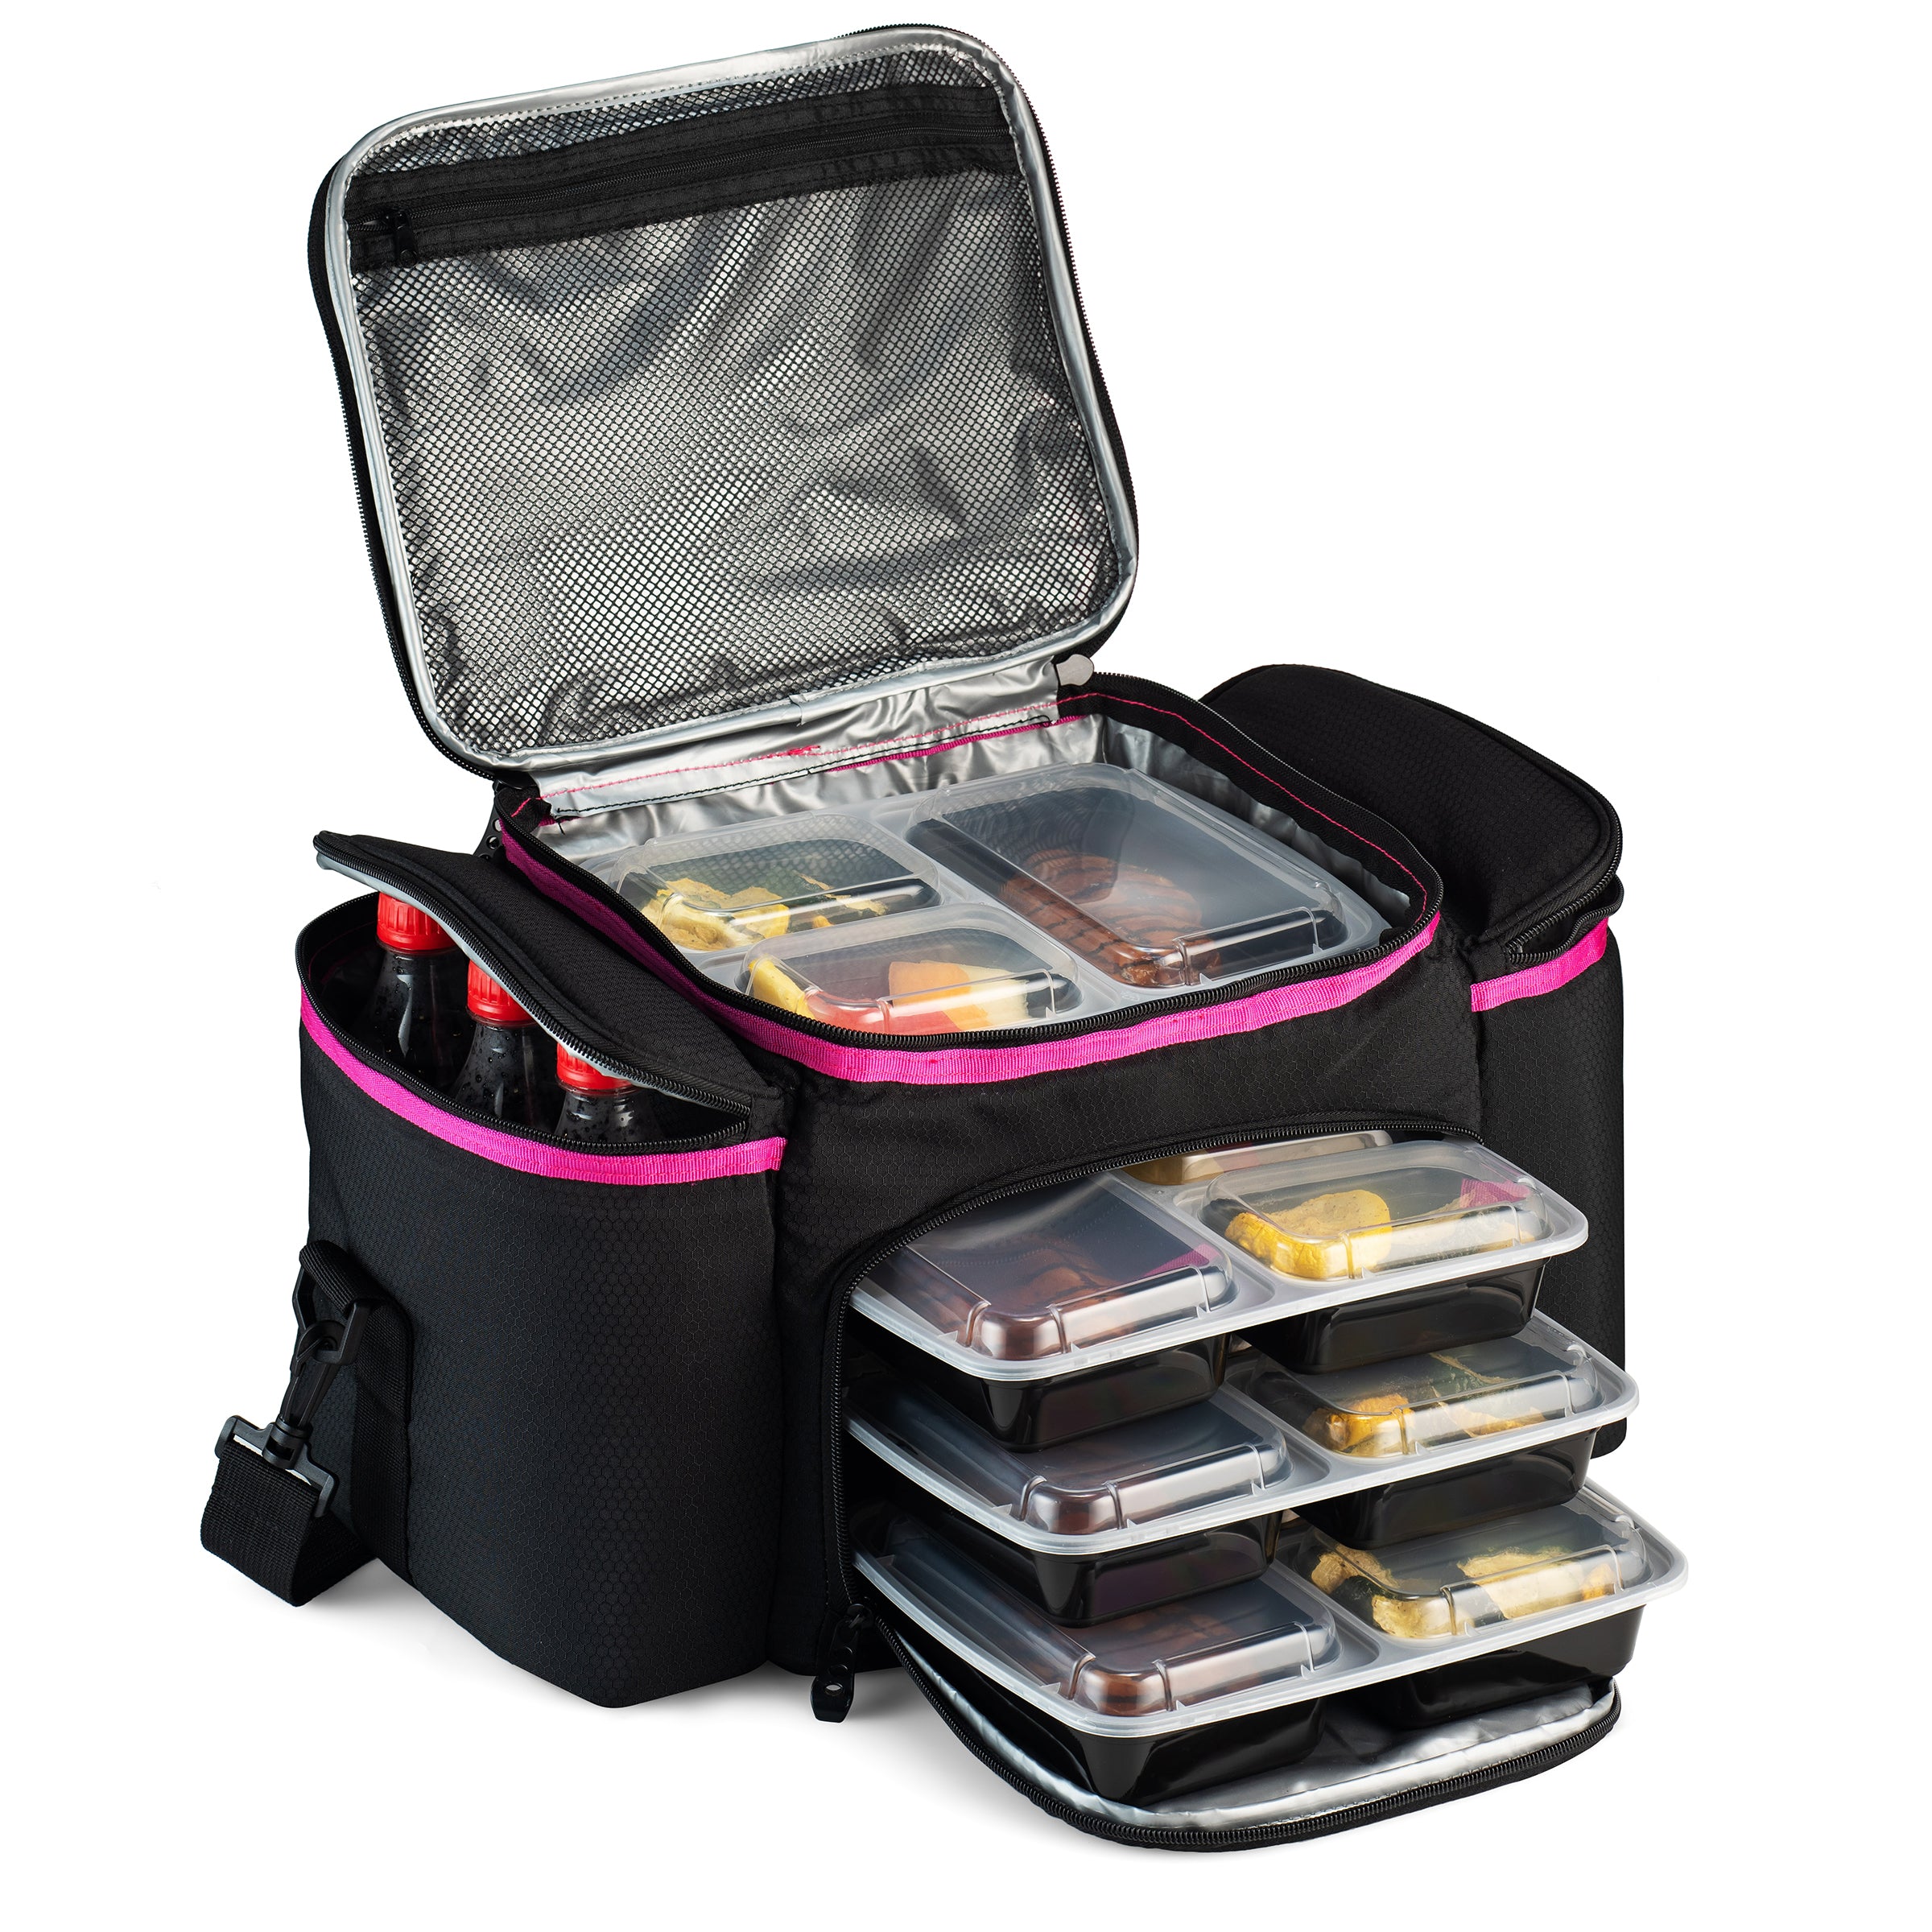 Lunch cooler Box bag Insulated Compartment Leak proof good for